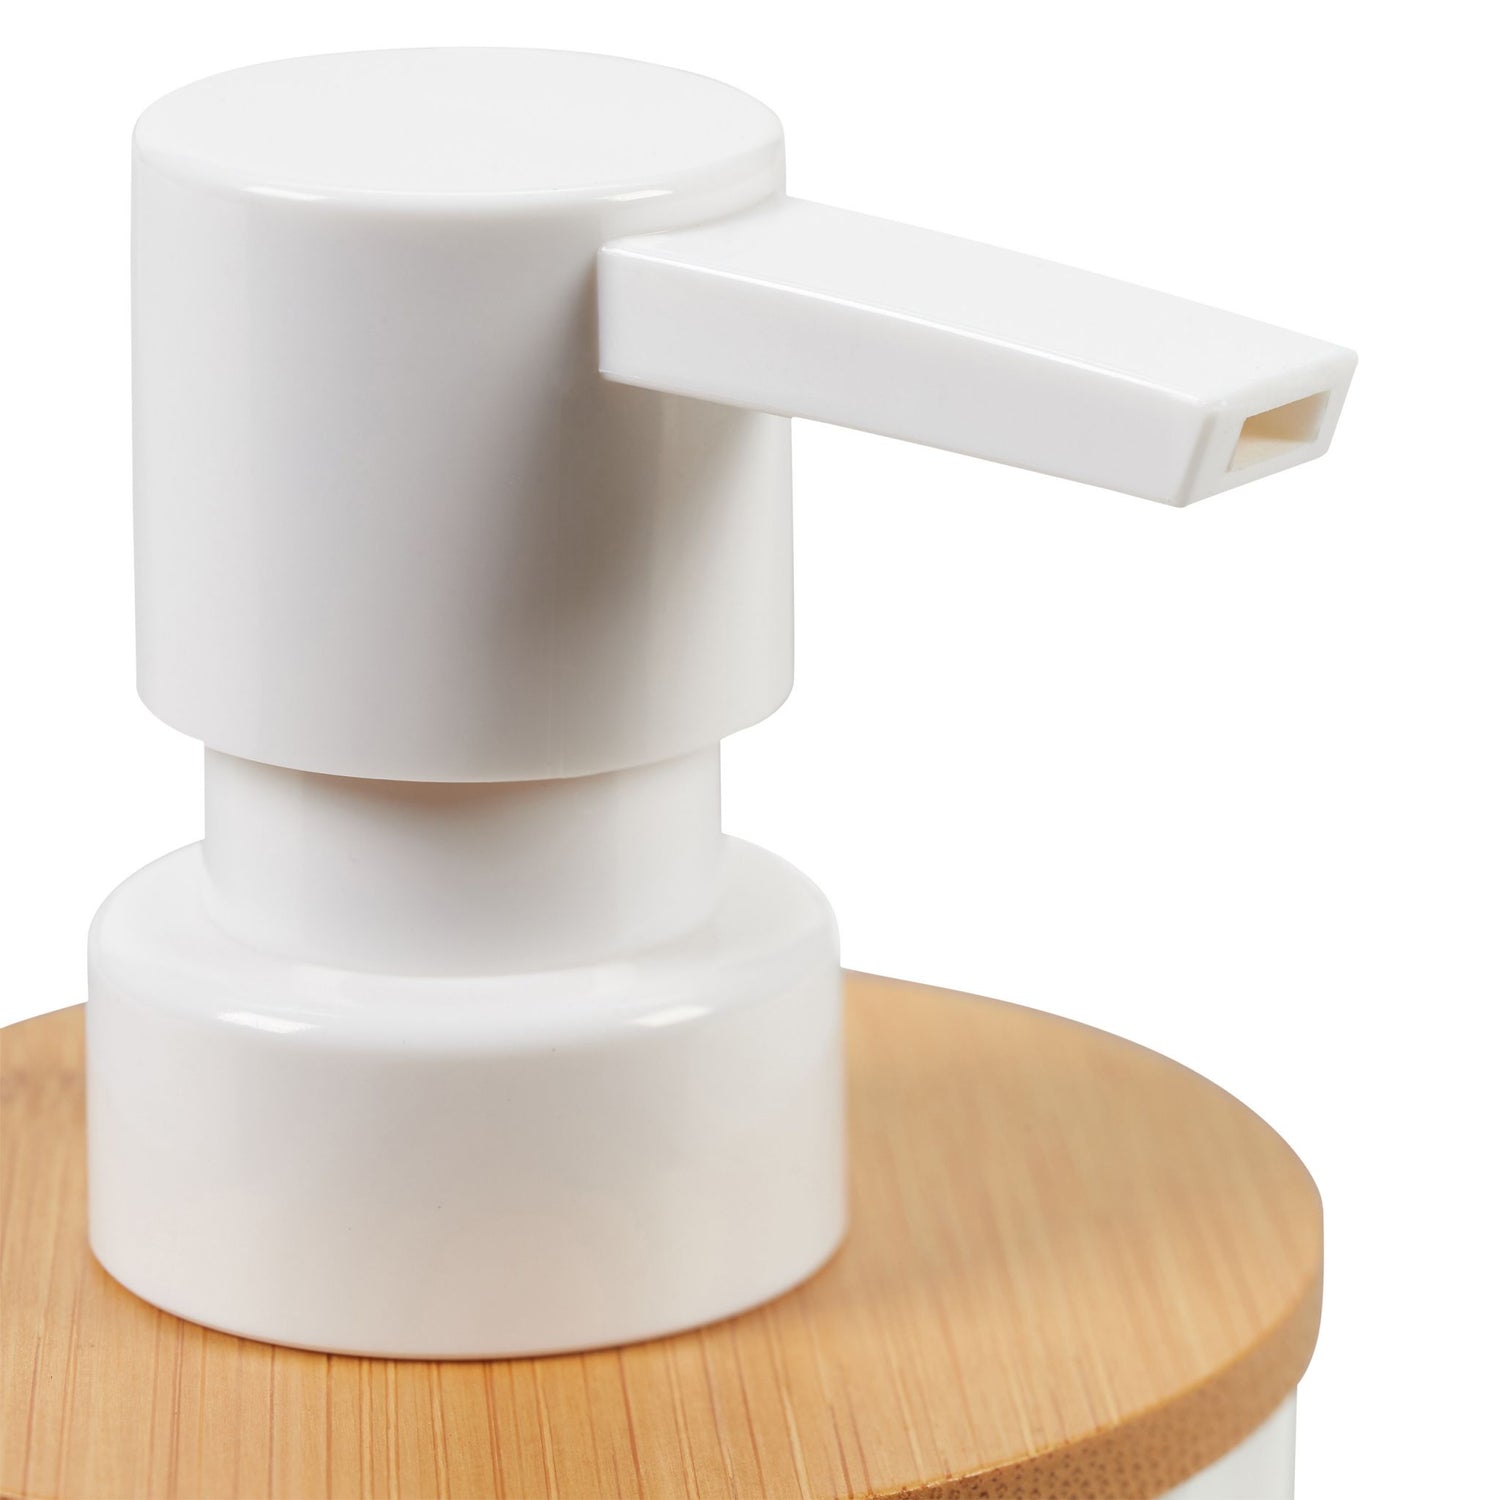 RelaxDays Soap Dispenser with Bamboo Decor Bamboo Bathrooms